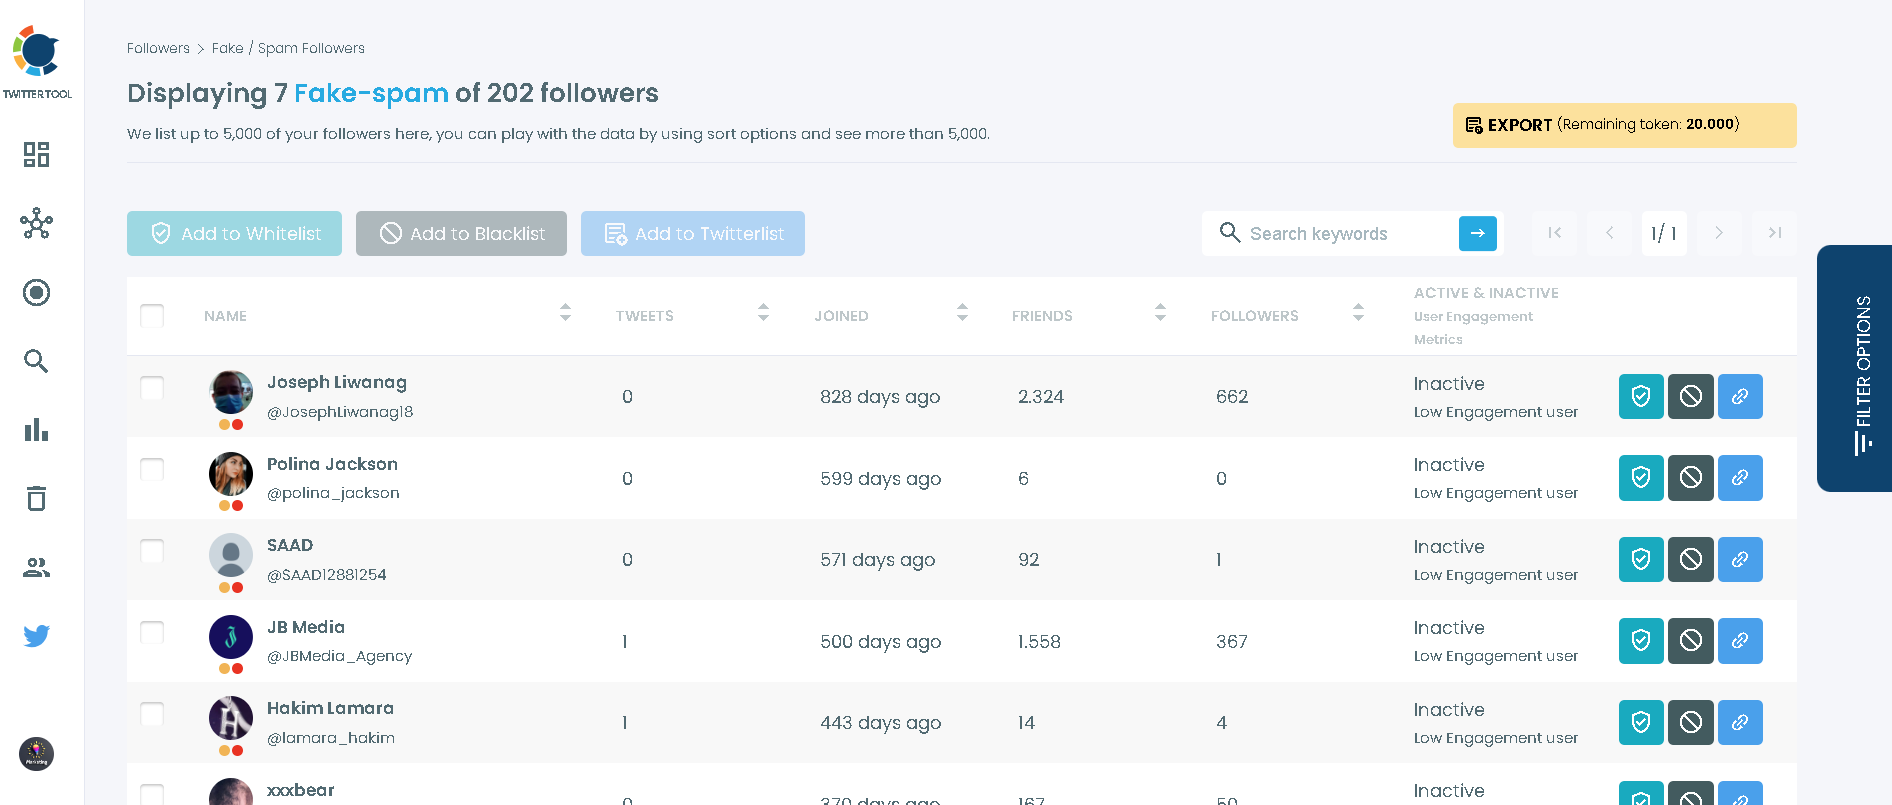 Circleboom Twitter allows you to list fake followers.